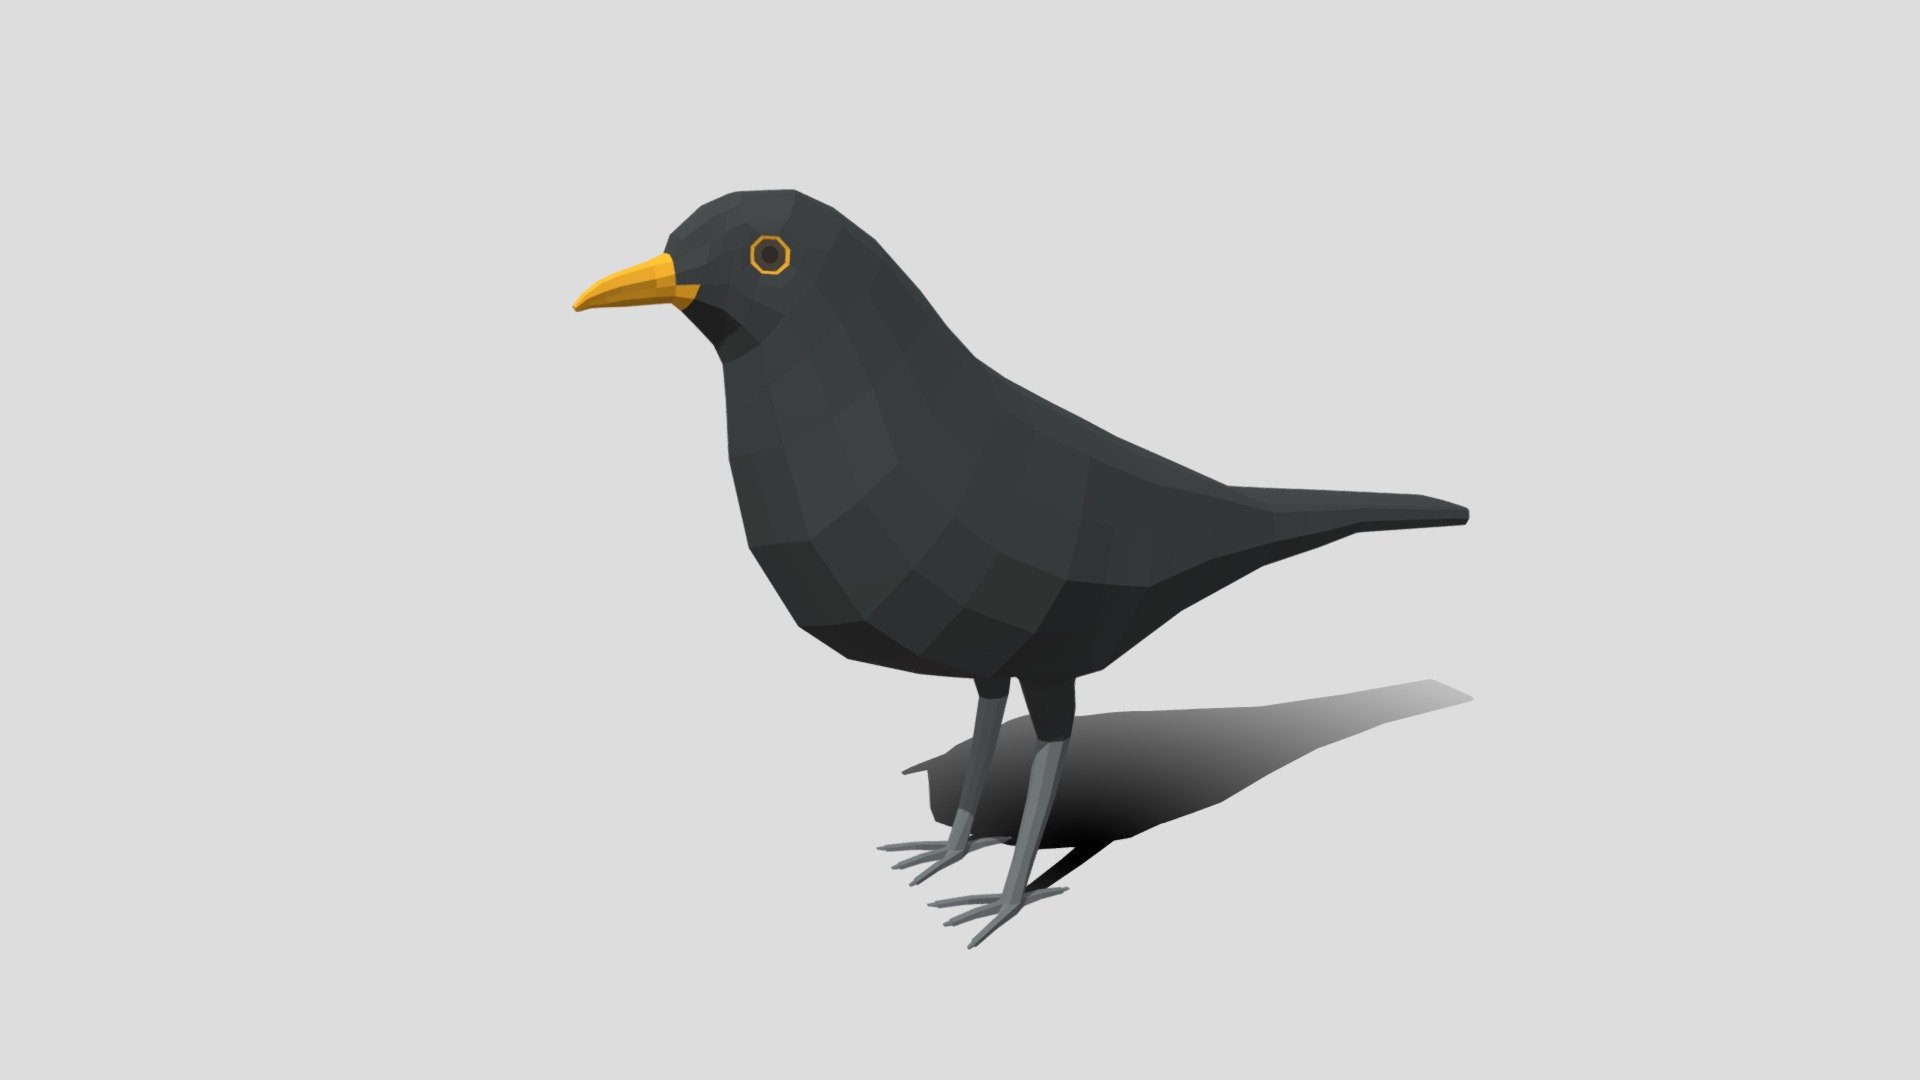 This is a low poly 3D model of a Blackbird. The low poly bird was modeled and prepared for low-poly style renderings, background, general CG visualization presented as a mesh with quads only.

Verts : 742 Faces: 740

The 3D model have simple materials with diffuse colors.

No ring, maps and no UVW mapping is available.

The original file was created in blender. You will receive a 3DS, OBJ, FBX, blend, DAE, Stl.

All preview images were rendered with Blender Cycles. Product is ready to render out-of-the-box. Please note that the lights, cameras, and background is only included in the .blend file. The model is clean and alone in the other provided files, centred at origin and has real-world scale 3d model